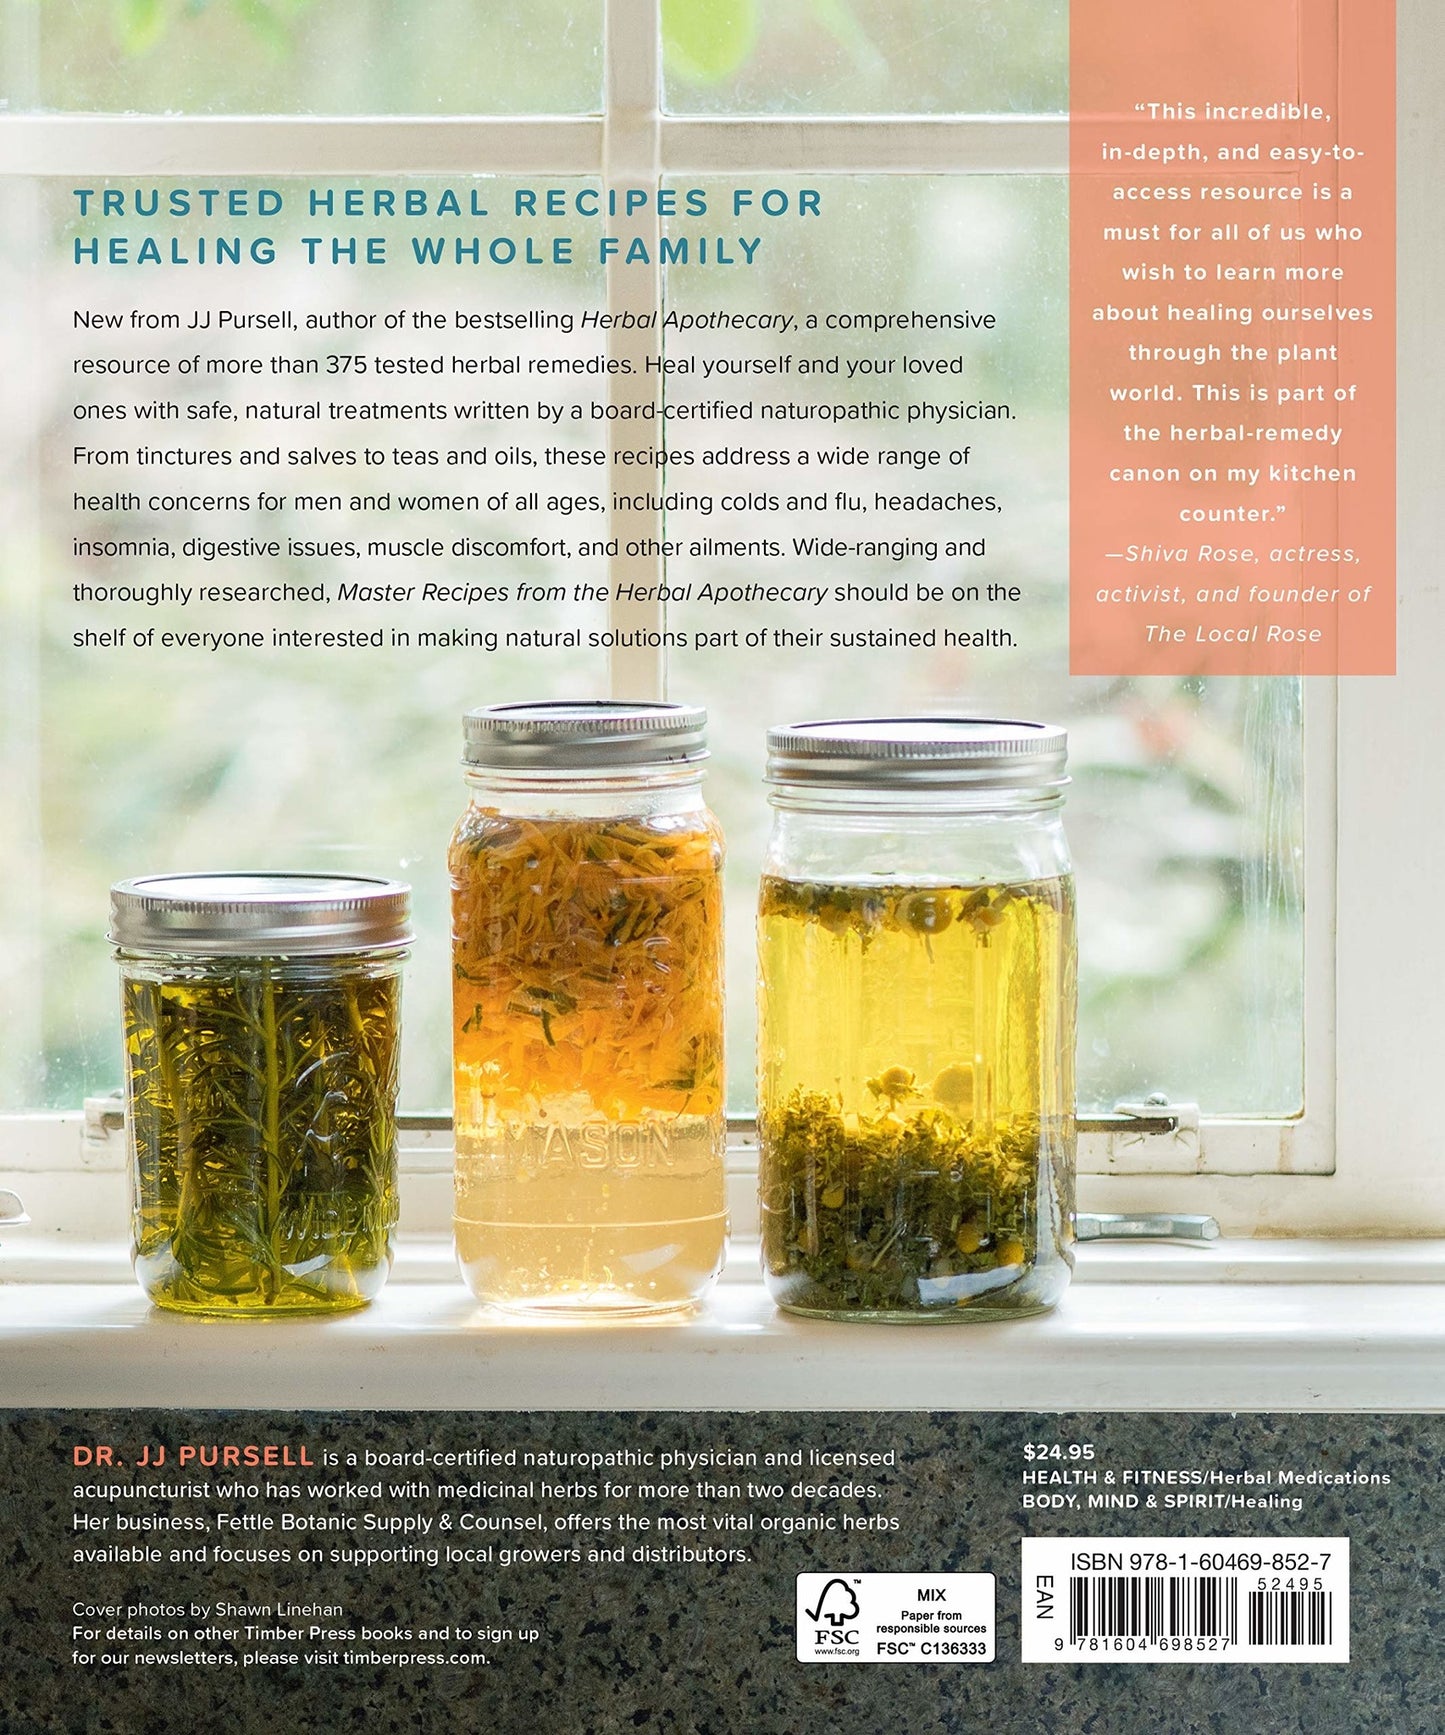 Master Recipes from the Herbal Apothecary: 375 Tinctures, Salves, Teas, Capsules, Oils, and Washes for Whole Body Health and Wellness - JJ Pursell